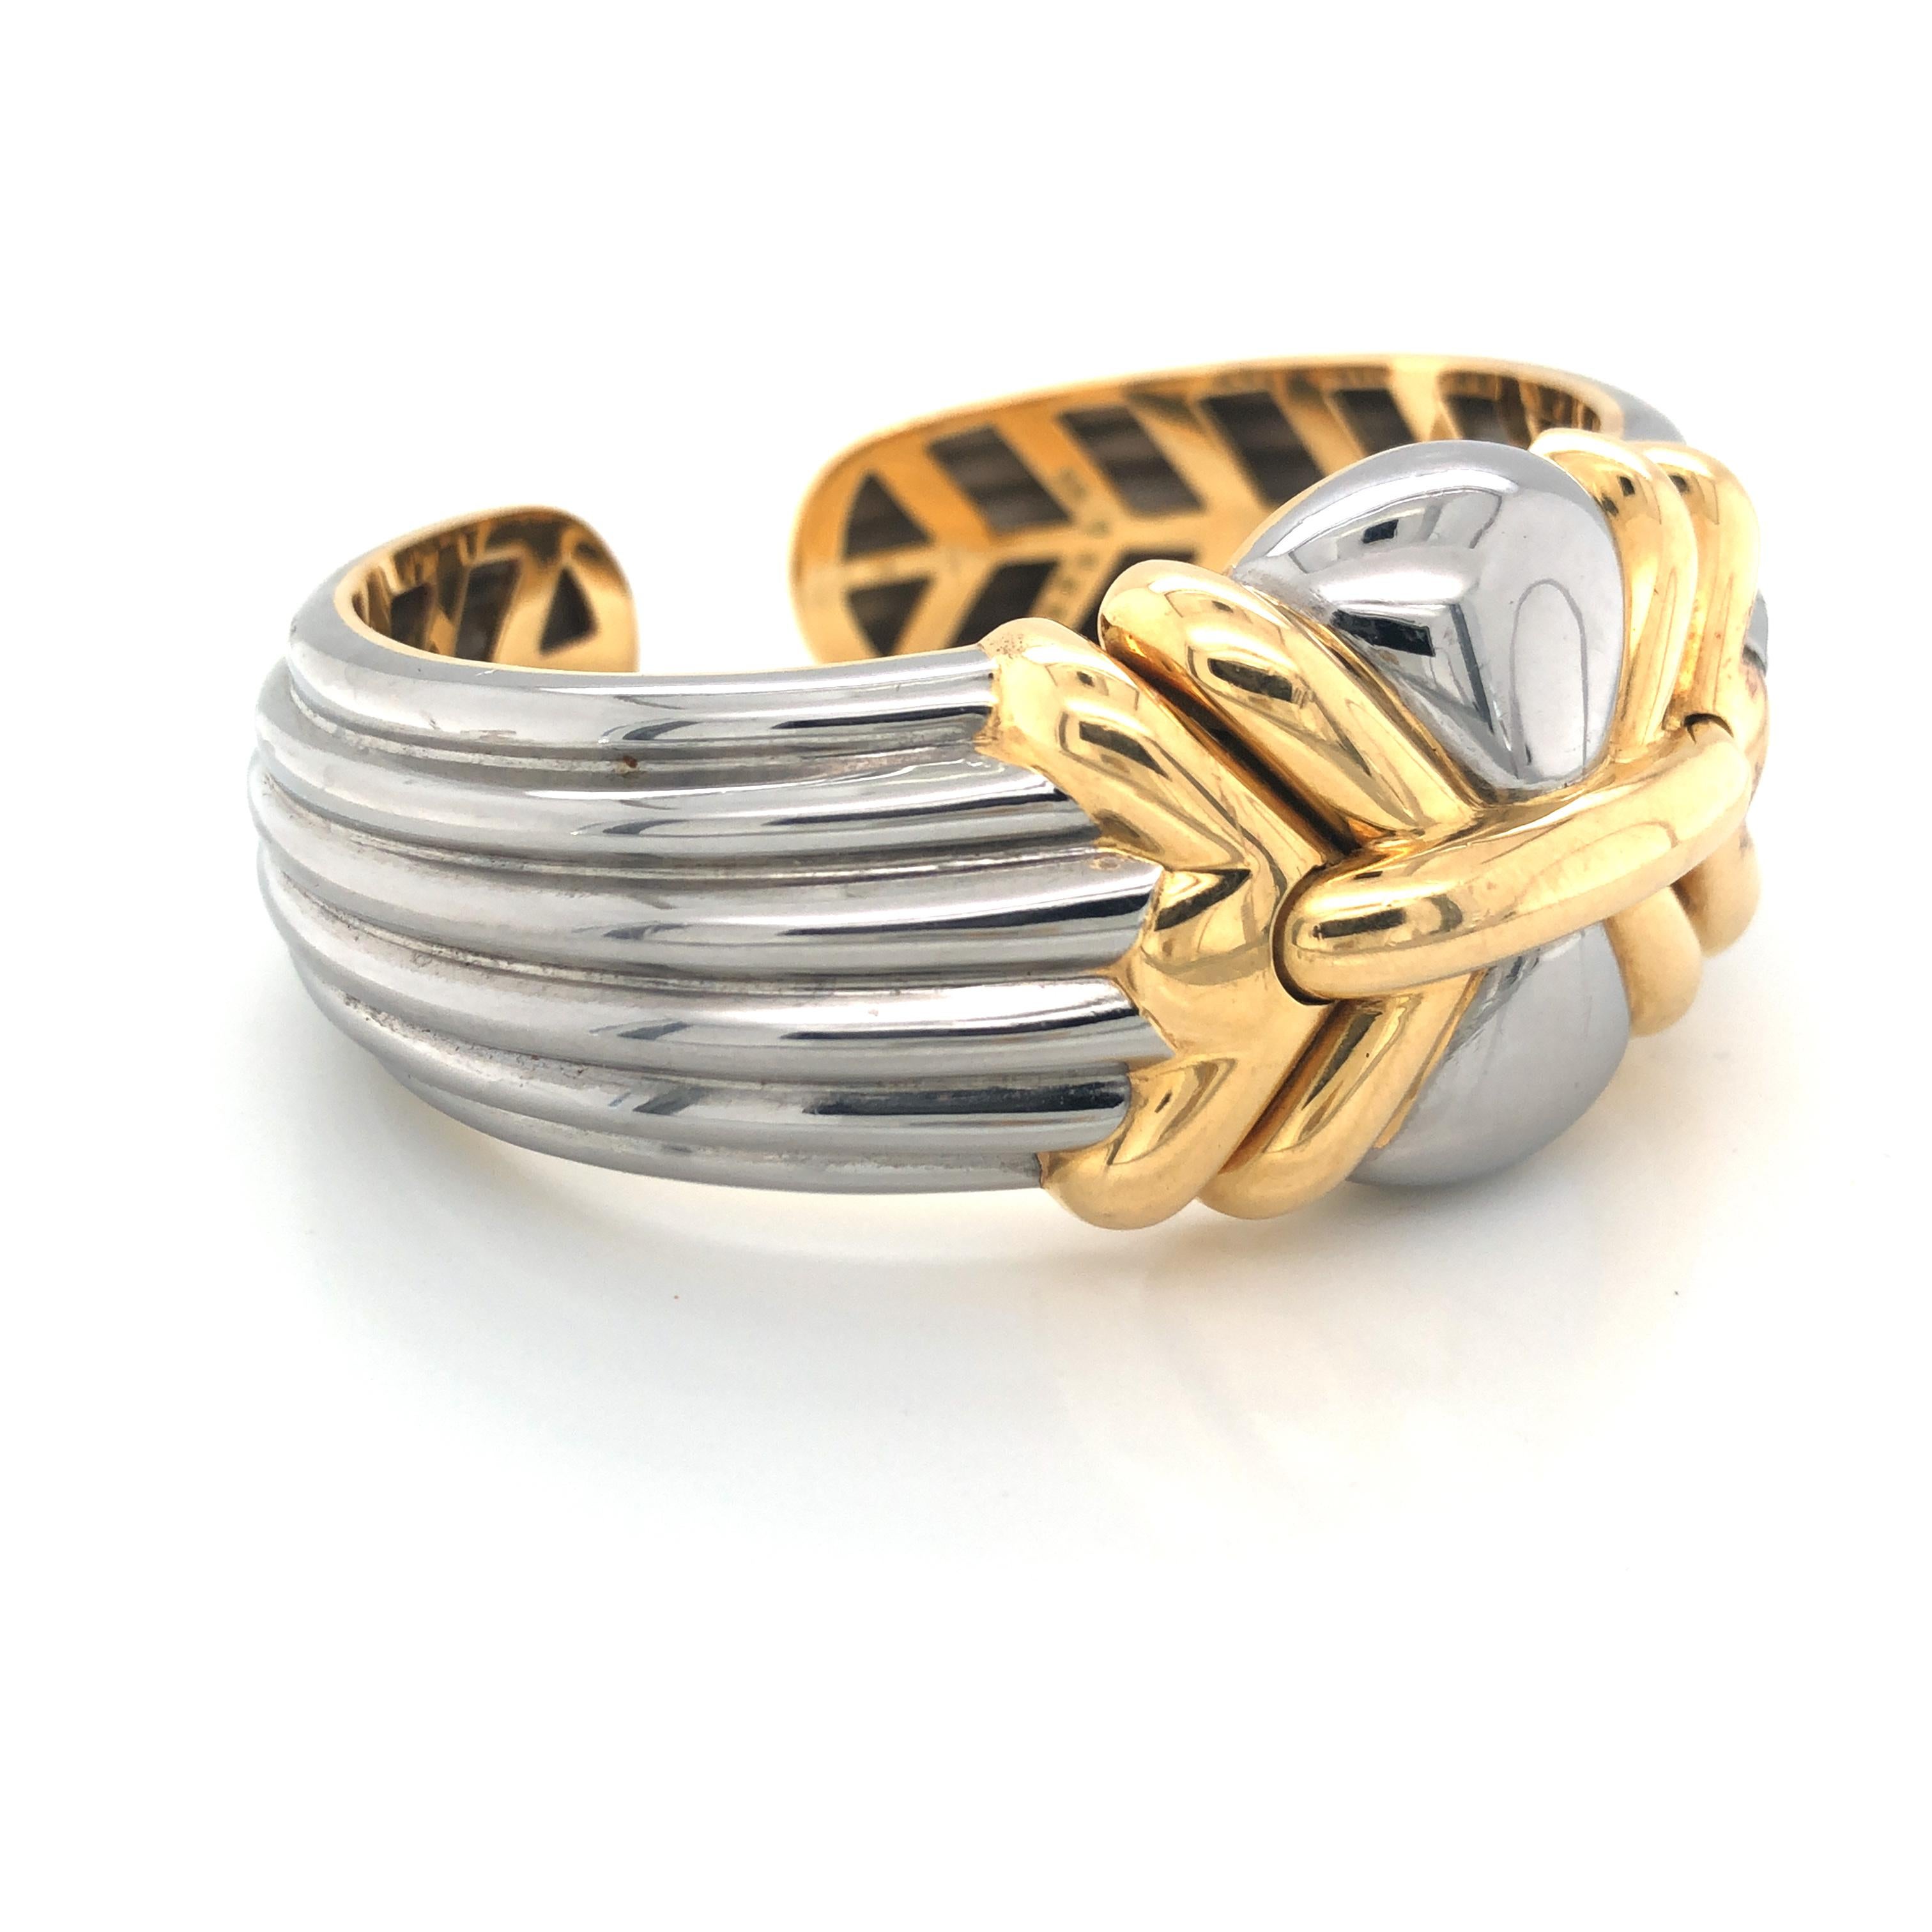 Stainless steel and gold cuff bracelet by Bulgari . The just over 1